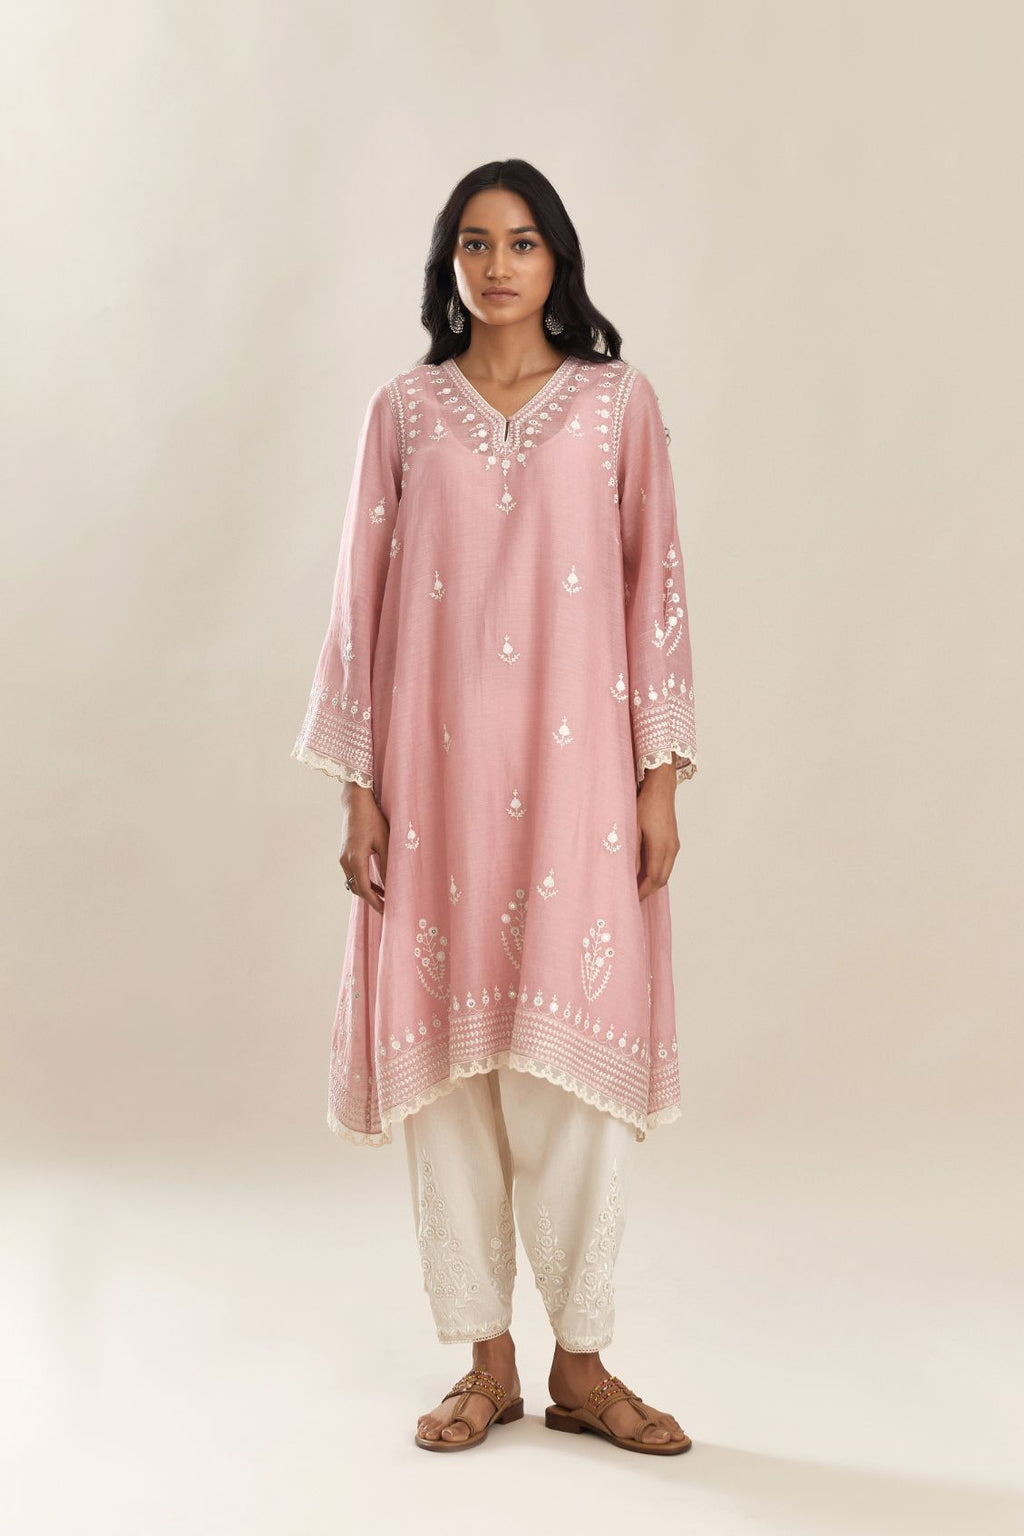 Cotton chanderi easy fit shortV neck kurta set with contrast off white silk thread embroidery, highlighted with hand attached sequin and beads.